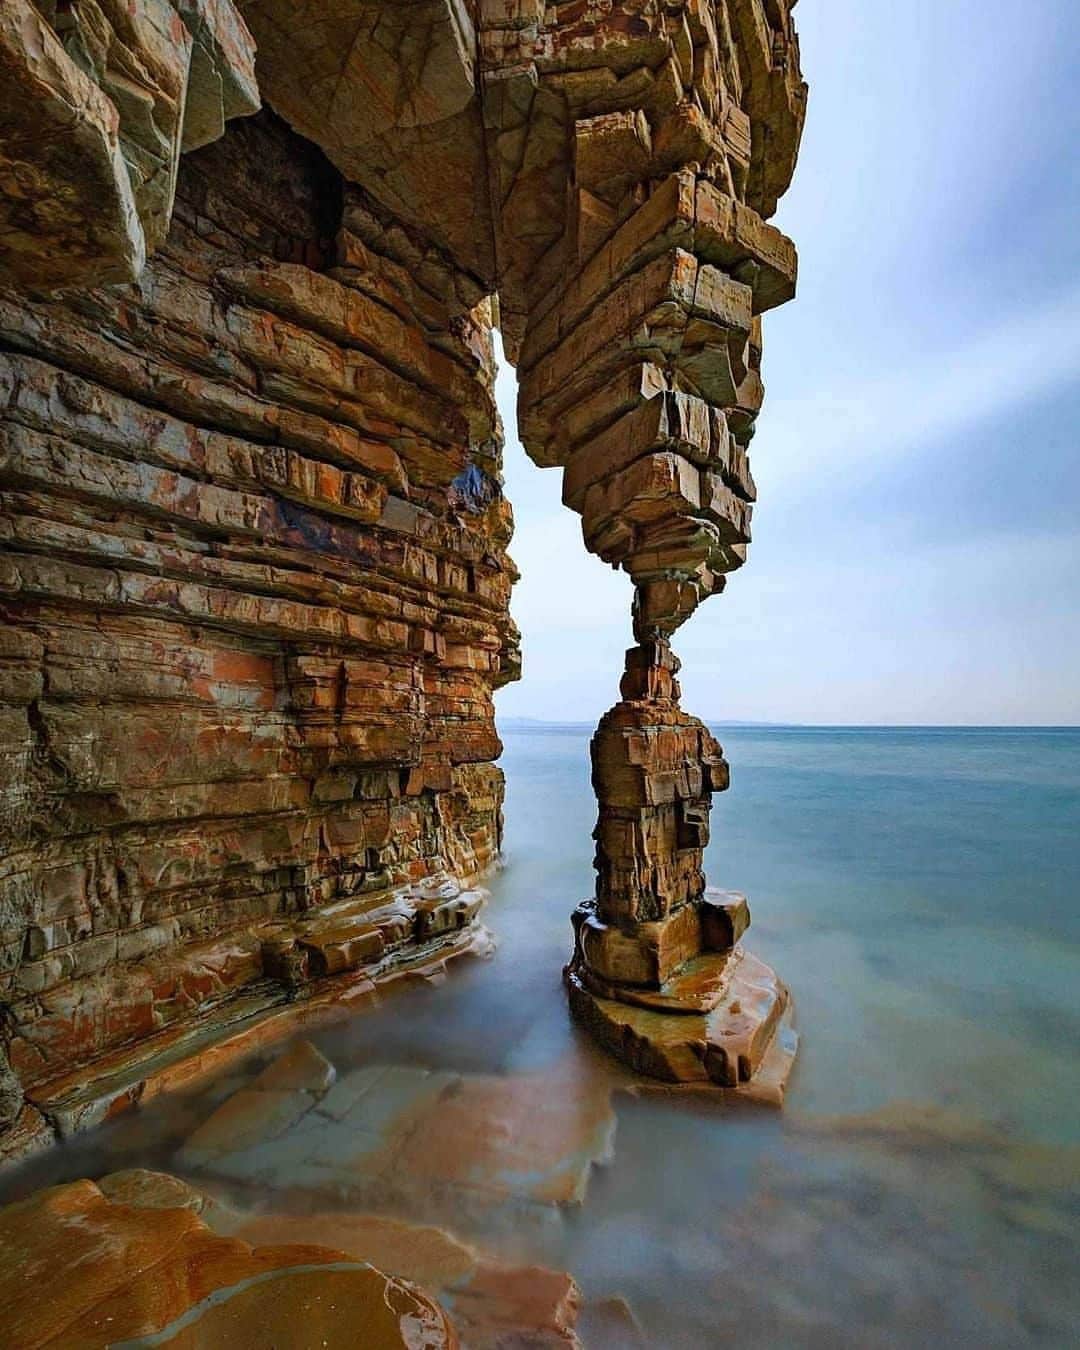 Discover Earthさんのインスタグラム写真 - (Discover EarthInstagram)「Would you like to go see this rock formation?  "In a small secluded rocky beach, approximately 120 Km from Dalian, there is this beautiful rock formation called "Table Leg Rock". There is a small "catch" to go there: you have to walk along the beach beside a steep cliff at low tide to reach this place. When we went there it was around 3,30 p.m. Then you have to wait until the tide rises up to the feet of the rock to get a nice foreground of the stones covered by the sea, and this happened around 6 p.m. The problem was that by 7 p.m. the way back was completely submerged, the tide kept rising constantly until 10 p.m., flooding completely the small beach we were standing on and pushing us to find shelter in a small narrow cave behind the rock, where we had to wait until 3.30 in the morning for the tide to retreat and make the passage along the beach manageable again !!! So if you go there, be prepared to spend half a day buried in a cave like a bear....."  #discoverchina🇨🇳 on #pinterest with Raimondo Restelli   . . . . .  #china  #beijing  #中国  #shanghai  #rockformation  #nature  #travel  #landscape  #travelphotography  #rocks  #photography  #naturephotography  #hiking  #landscapephotography  #adventure  #rock  #beach  #explore  #travelgram  #roadtrip  #wanderlust  #geology  #vacation  #beautifuldestinations  #naturelover」1月25日 0時30分 - discoverearth